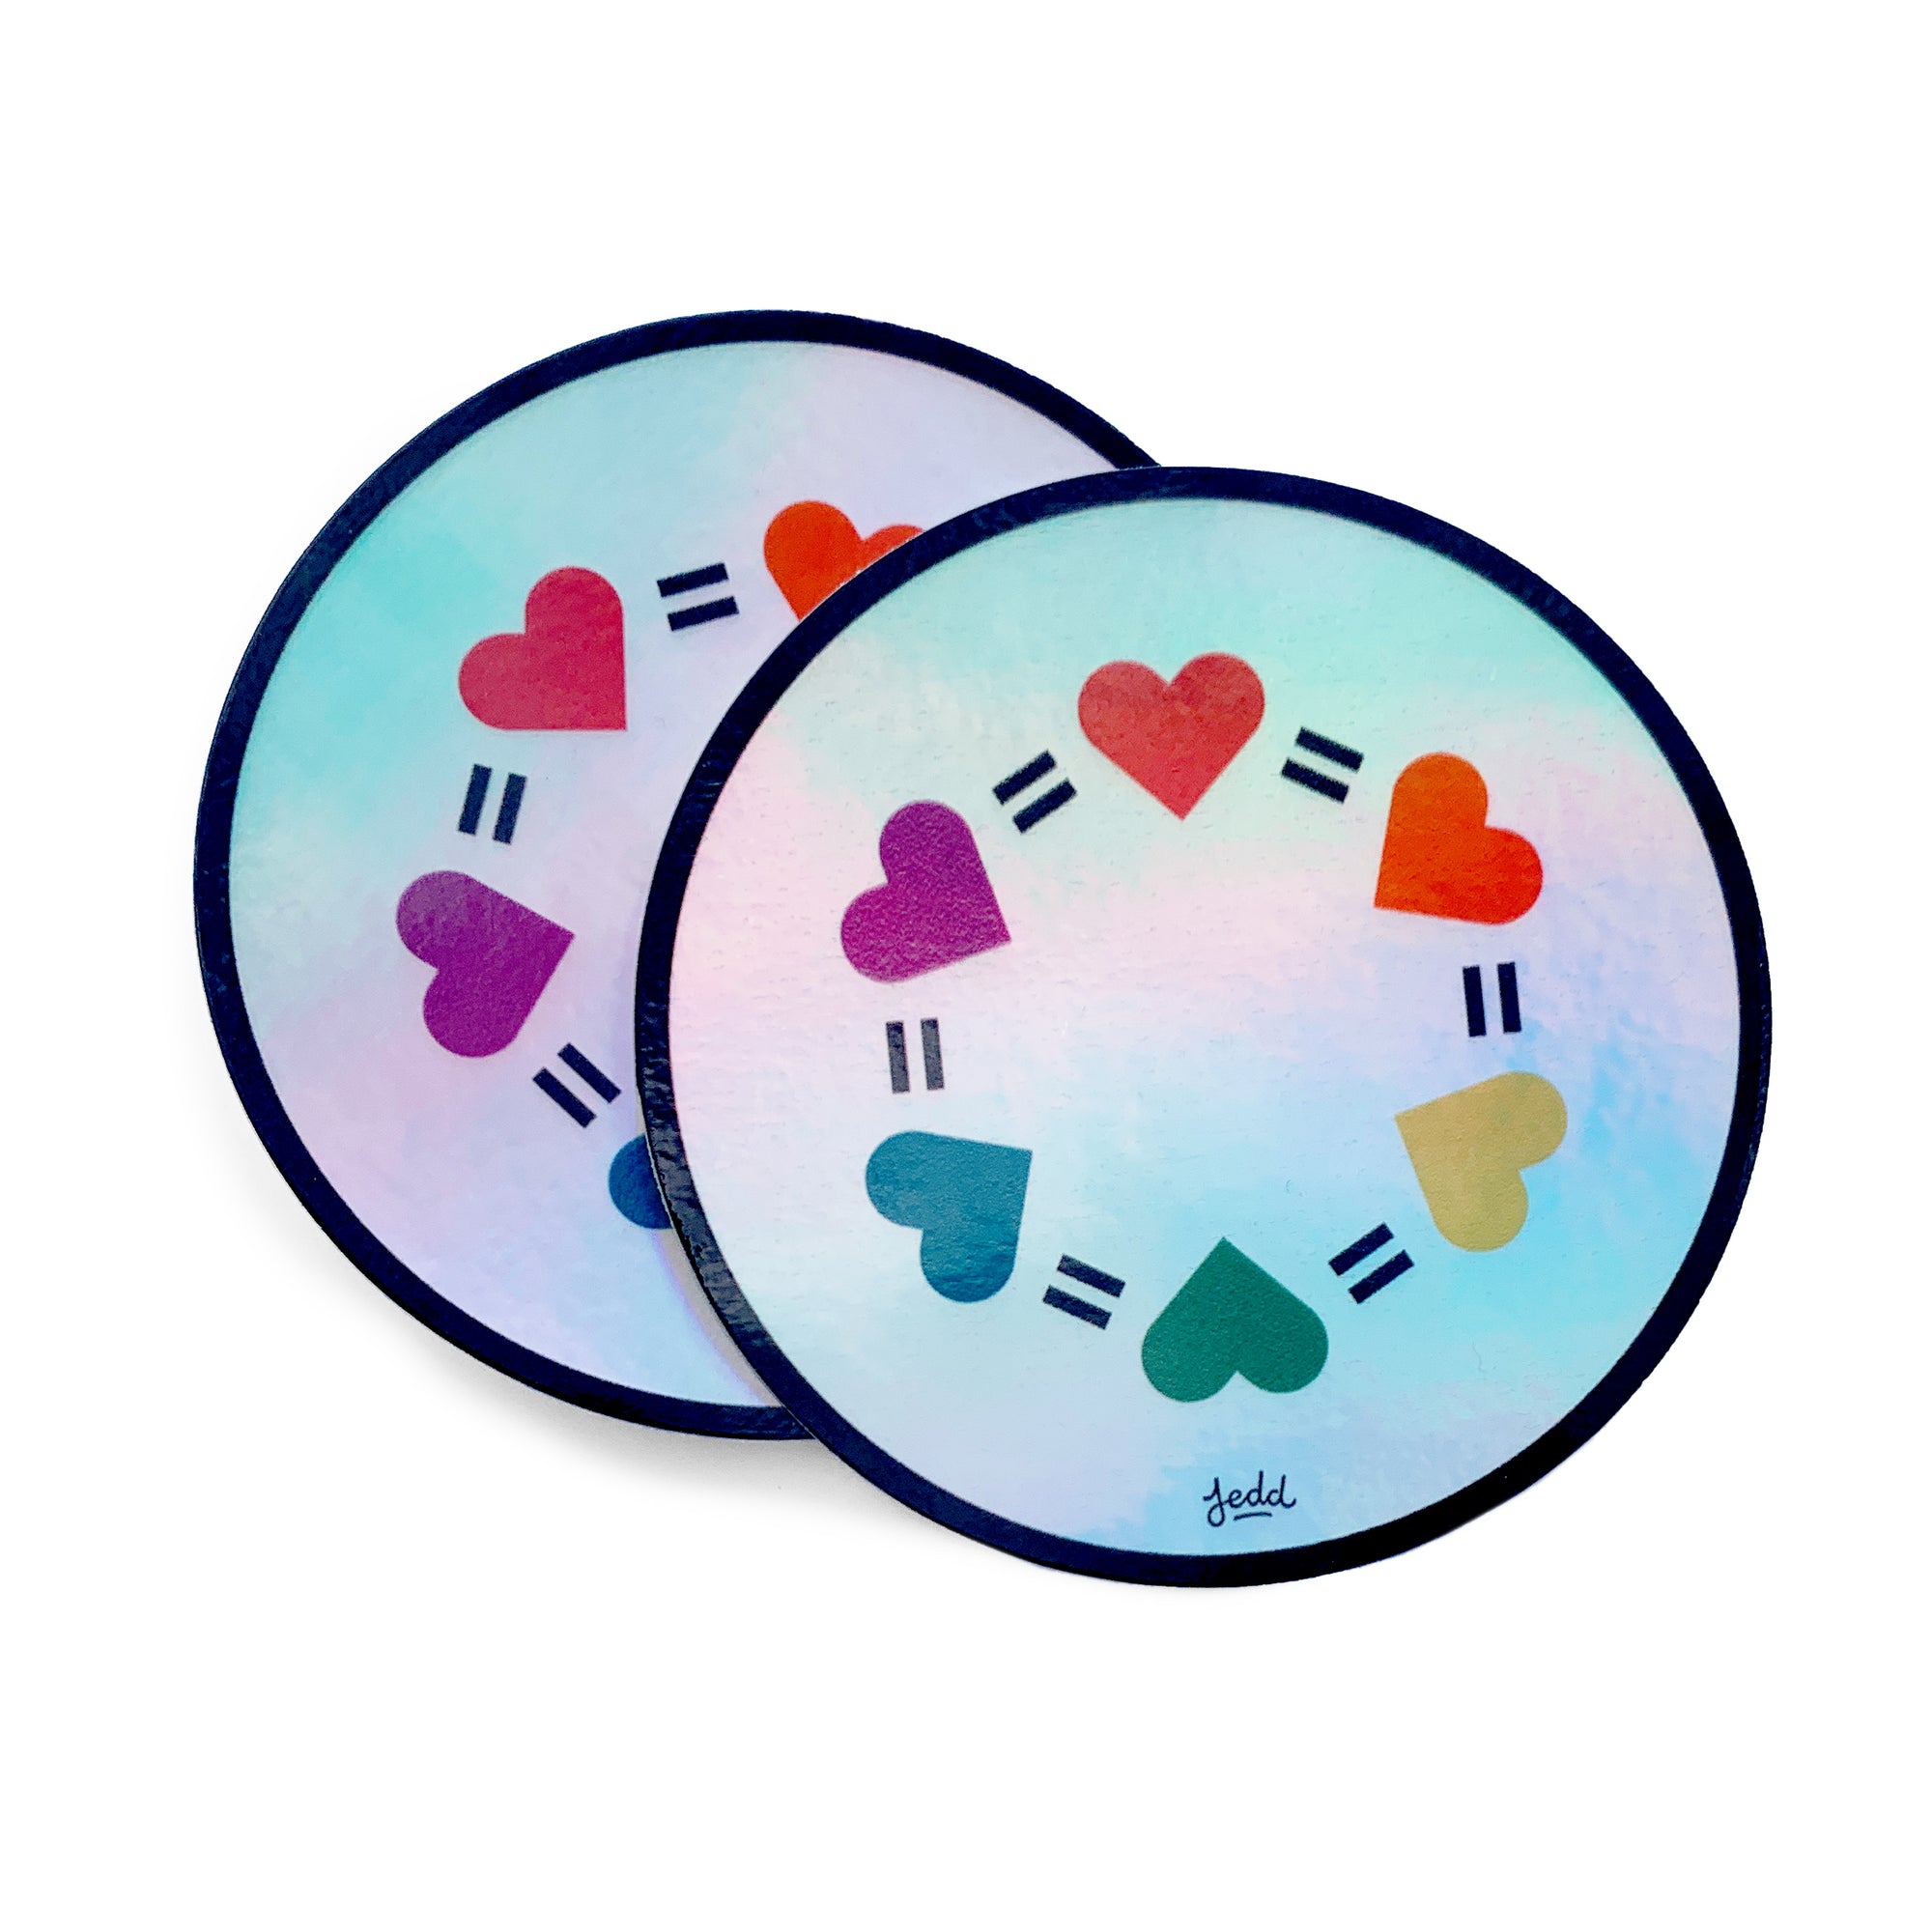 Two holographic stickers with a design that has hearts and equal signs